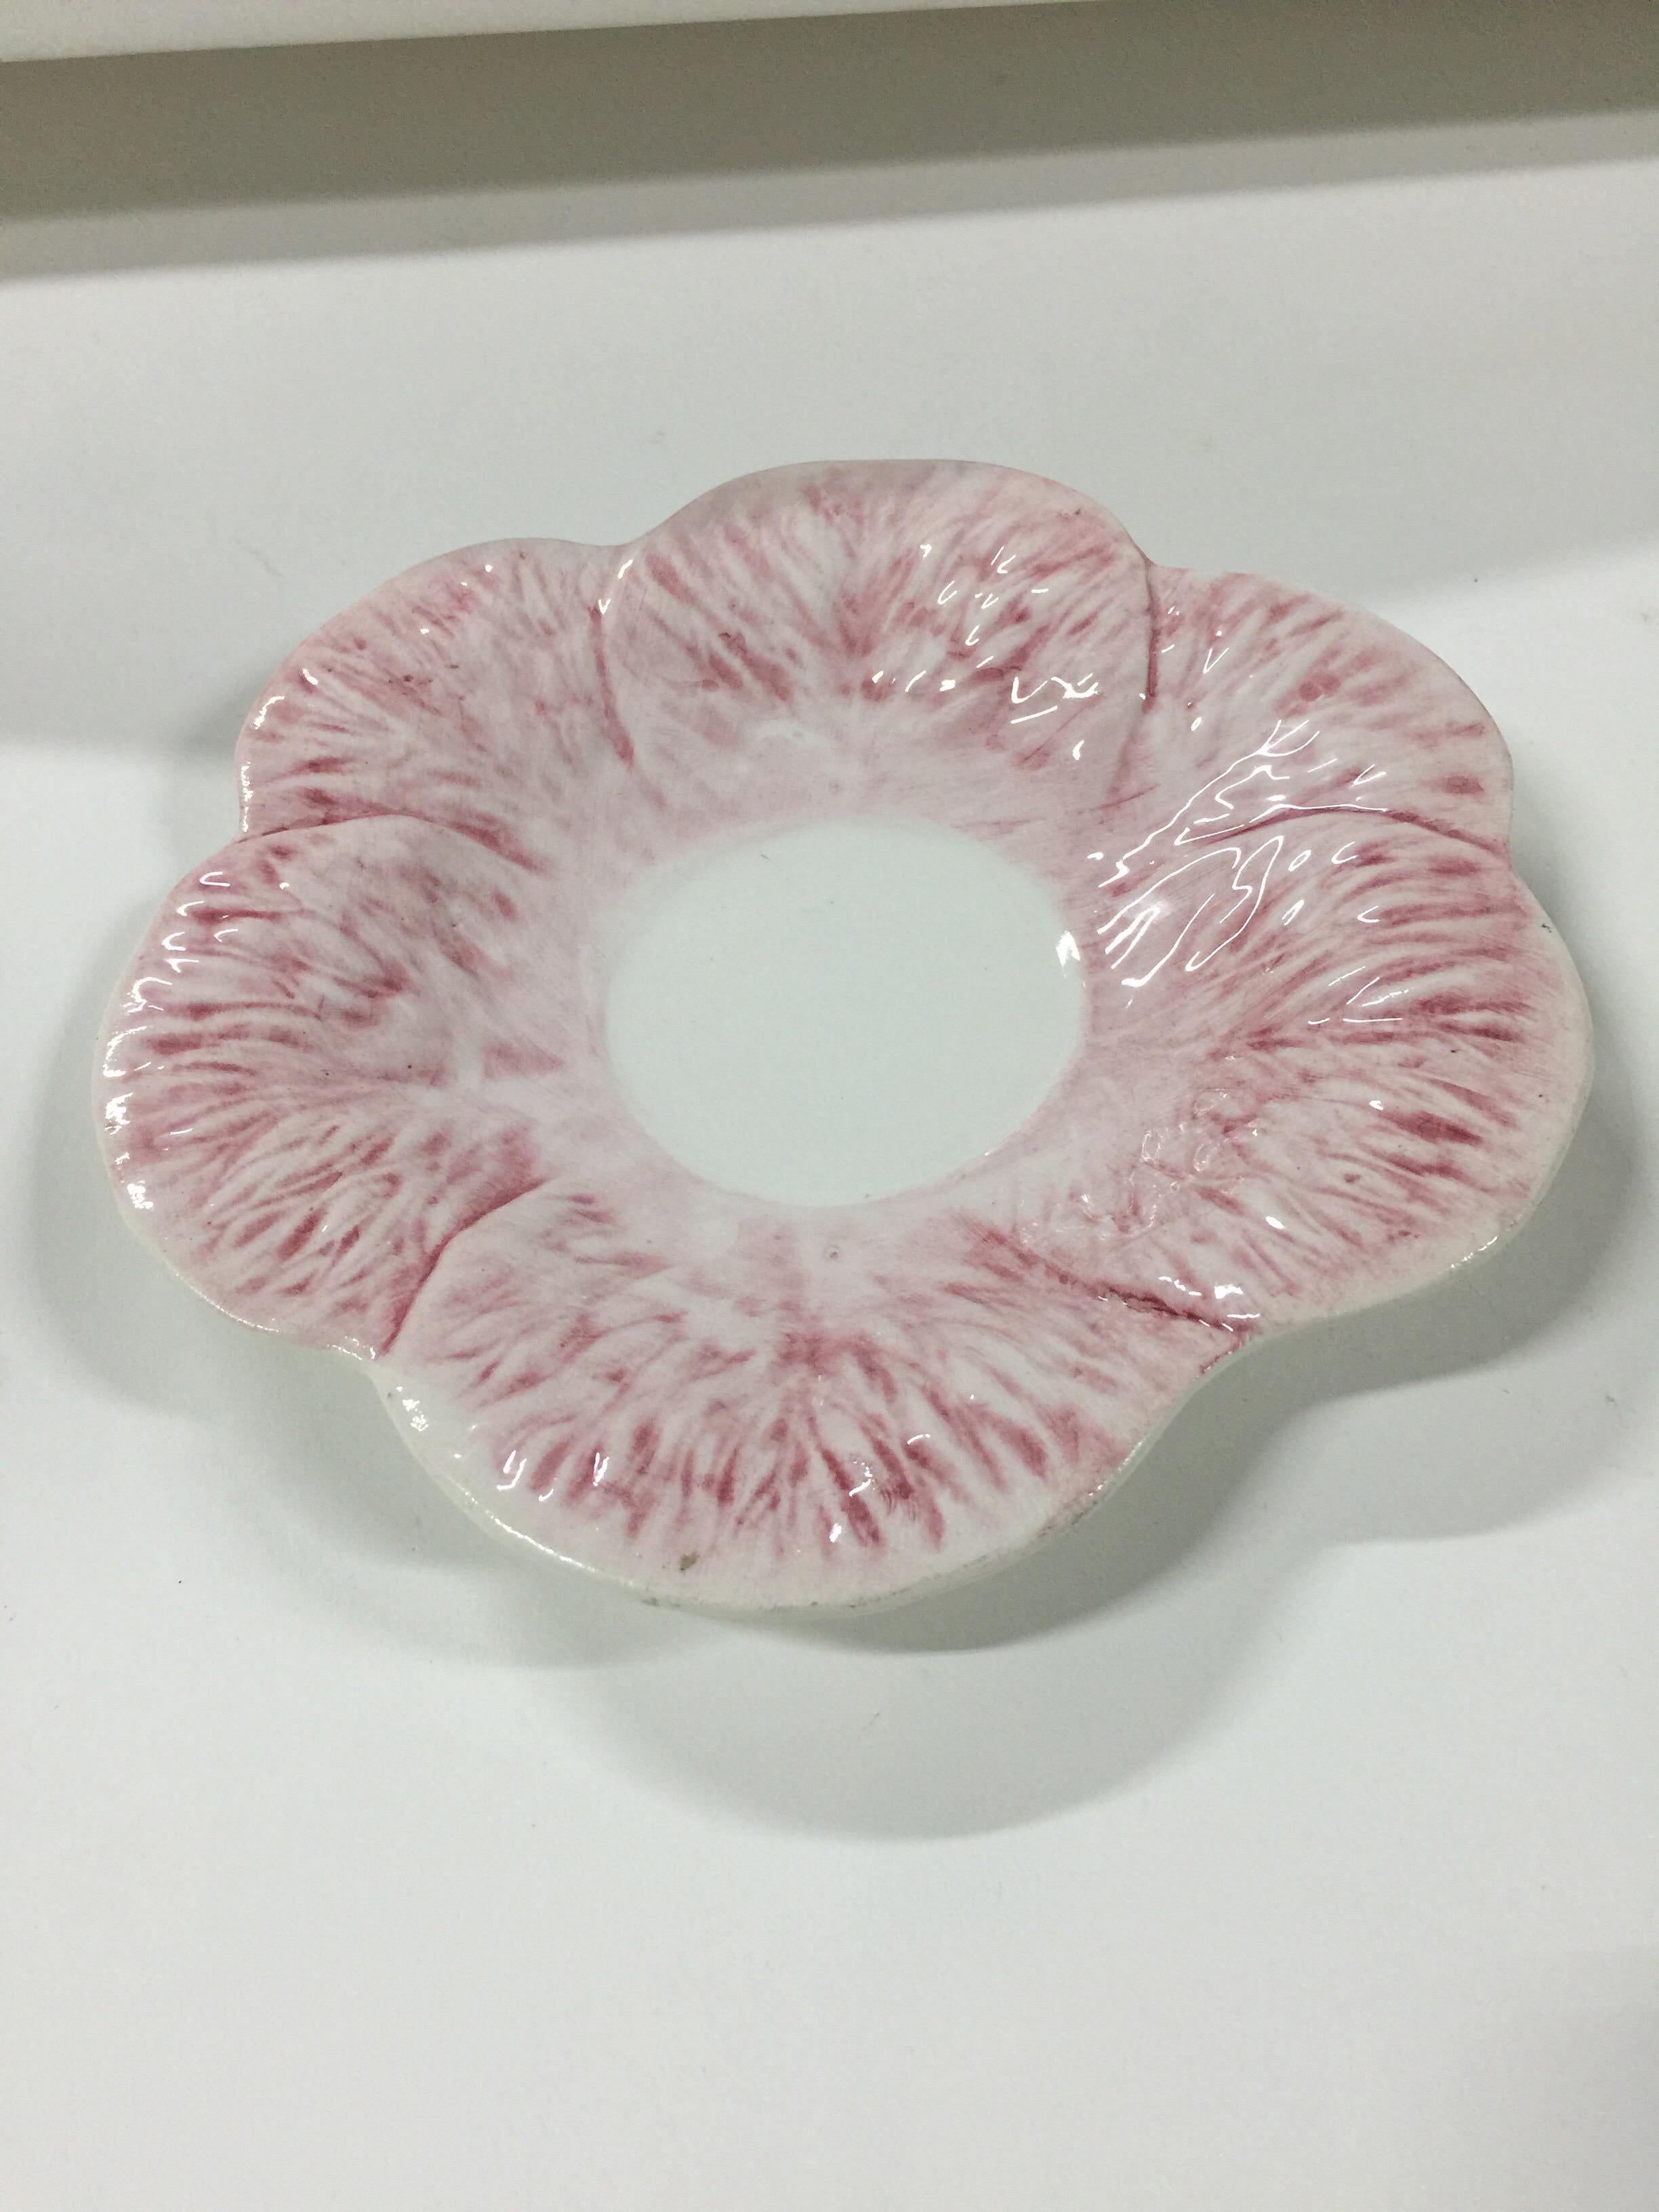 A Majolica porcelain dish in the pink cabbage pattern by Mottahedeh. Signed. Made in Italy, circa 1940-1950.

Measures: 8 inches in diameter.